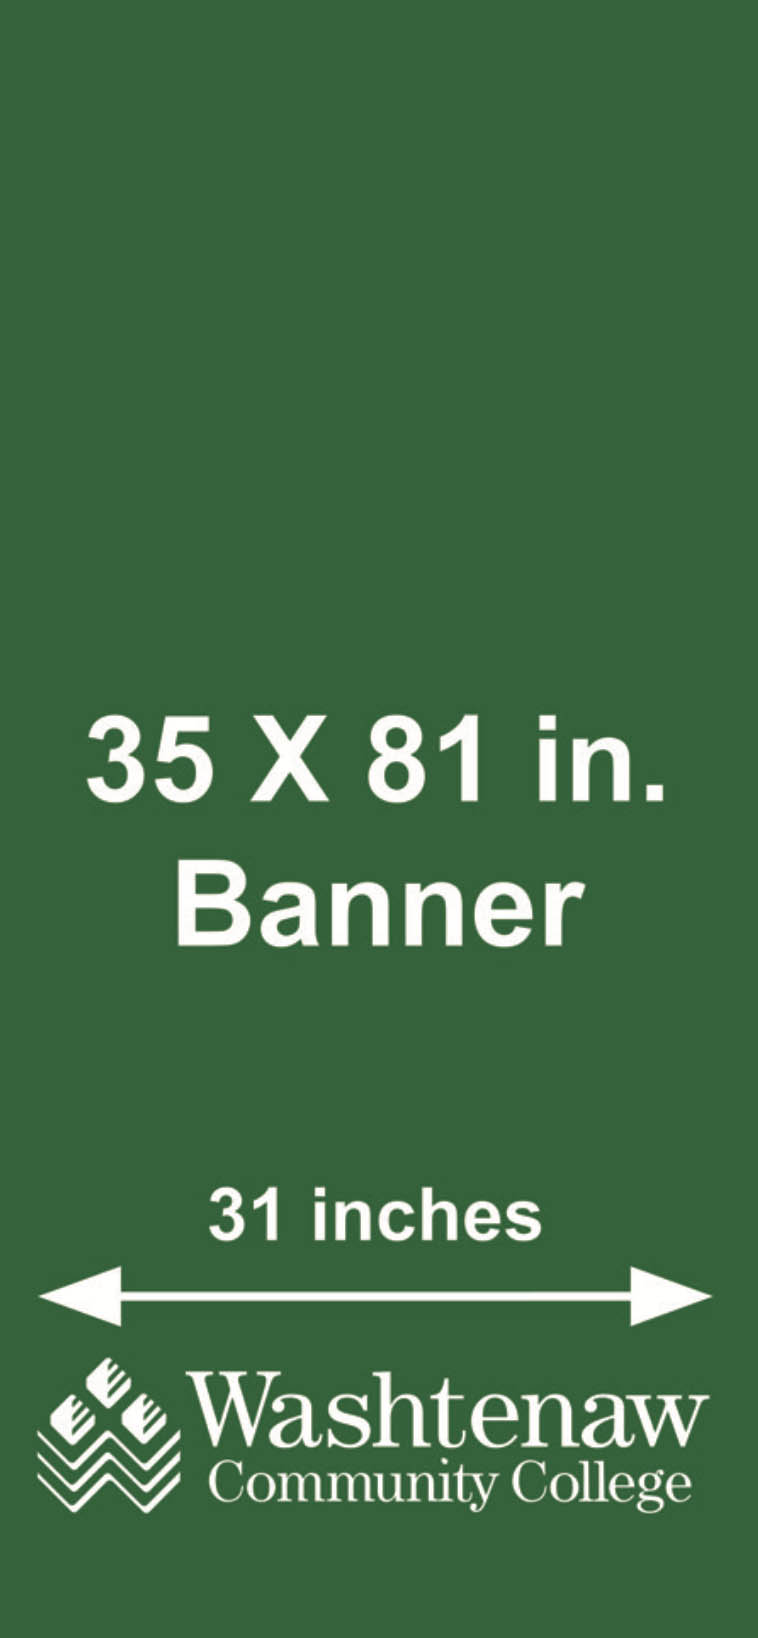 logo placement for banner size